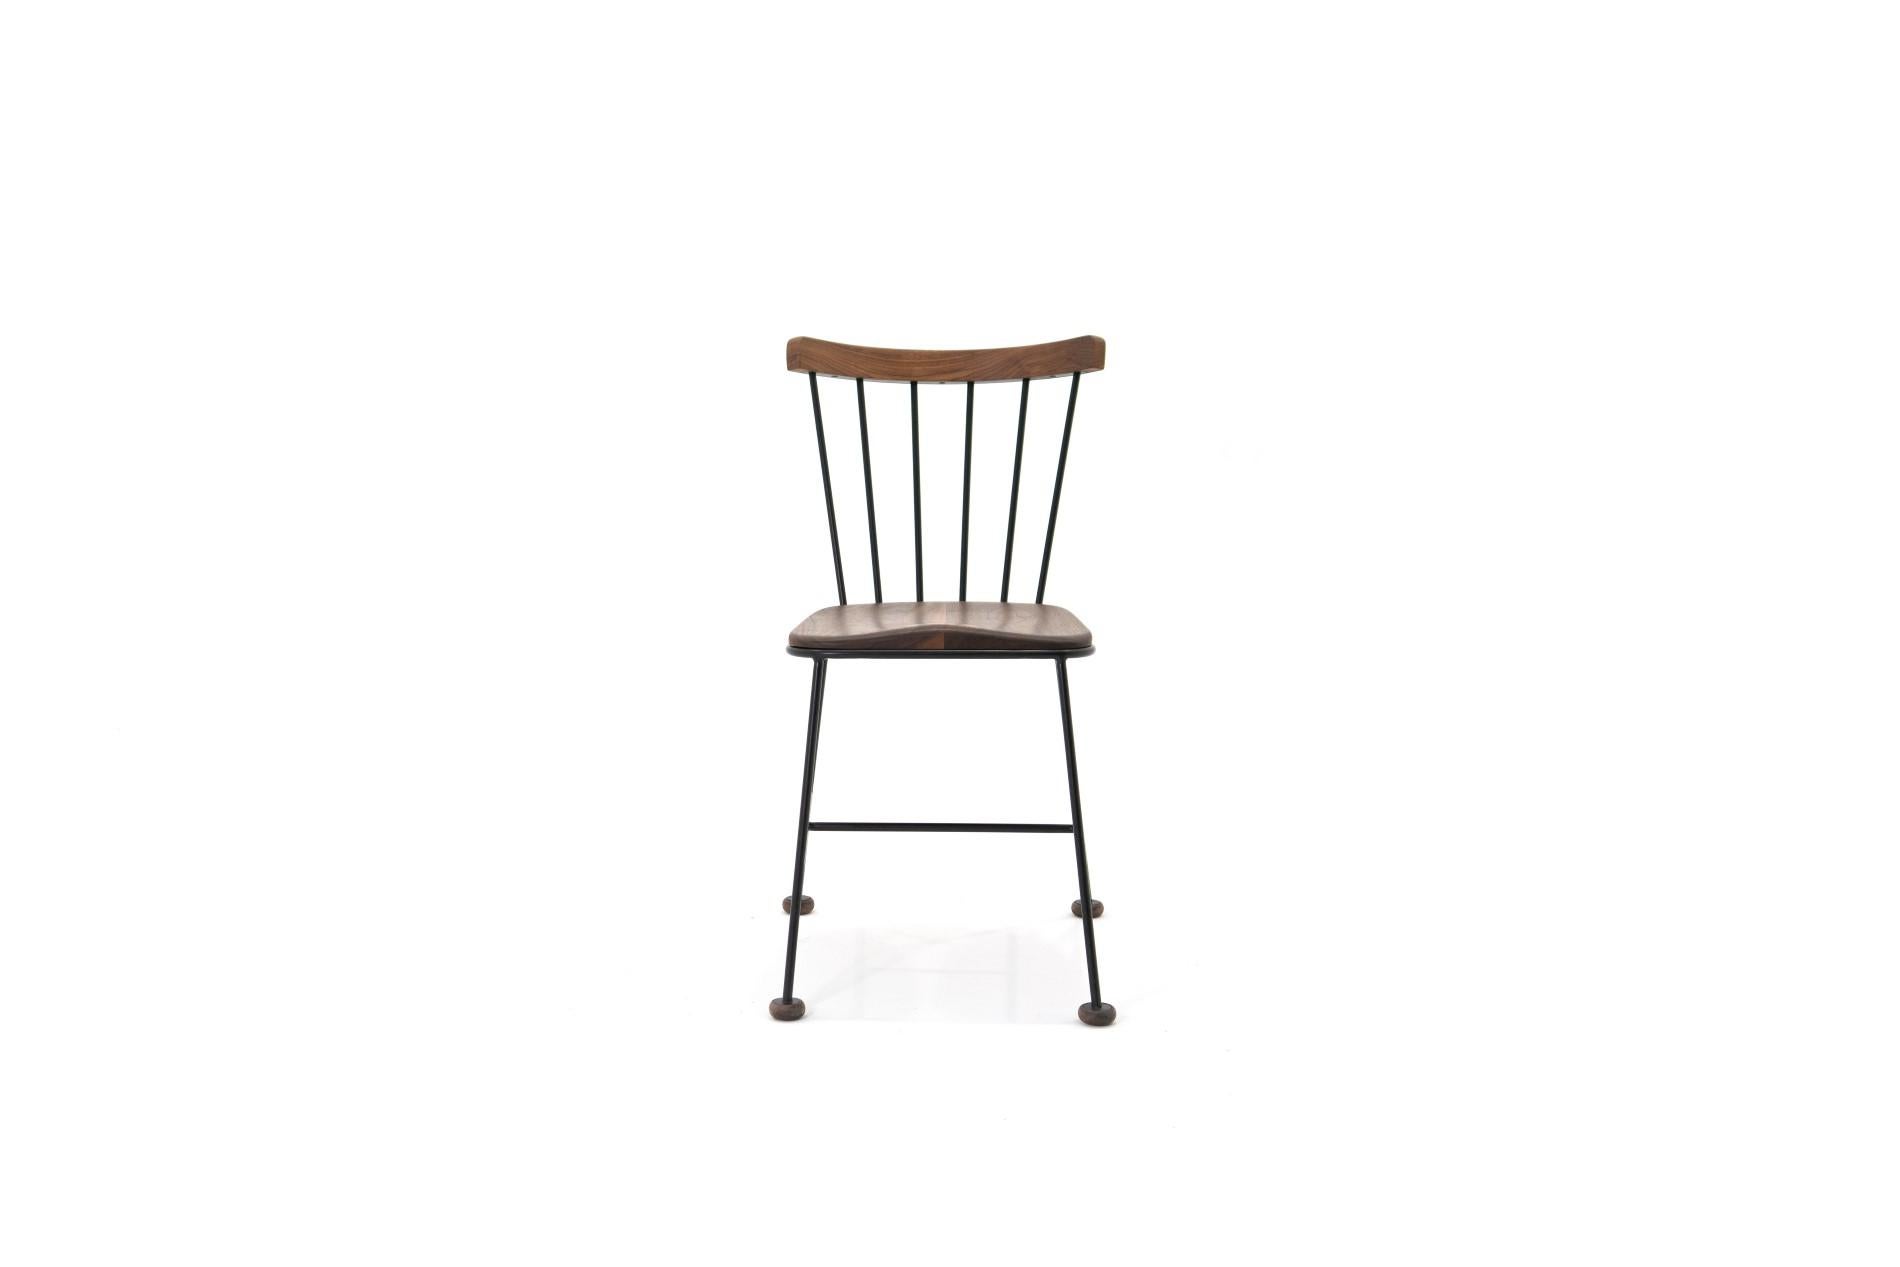 A retro-style chair featuring an ergonomic shaped wooden seat in-cased in a hand-bent steel frame with solid wood backrest. It works as a dining chair, office chair, or side chair. 

This handcrafted piece is hand-oiled using our in-house oils and